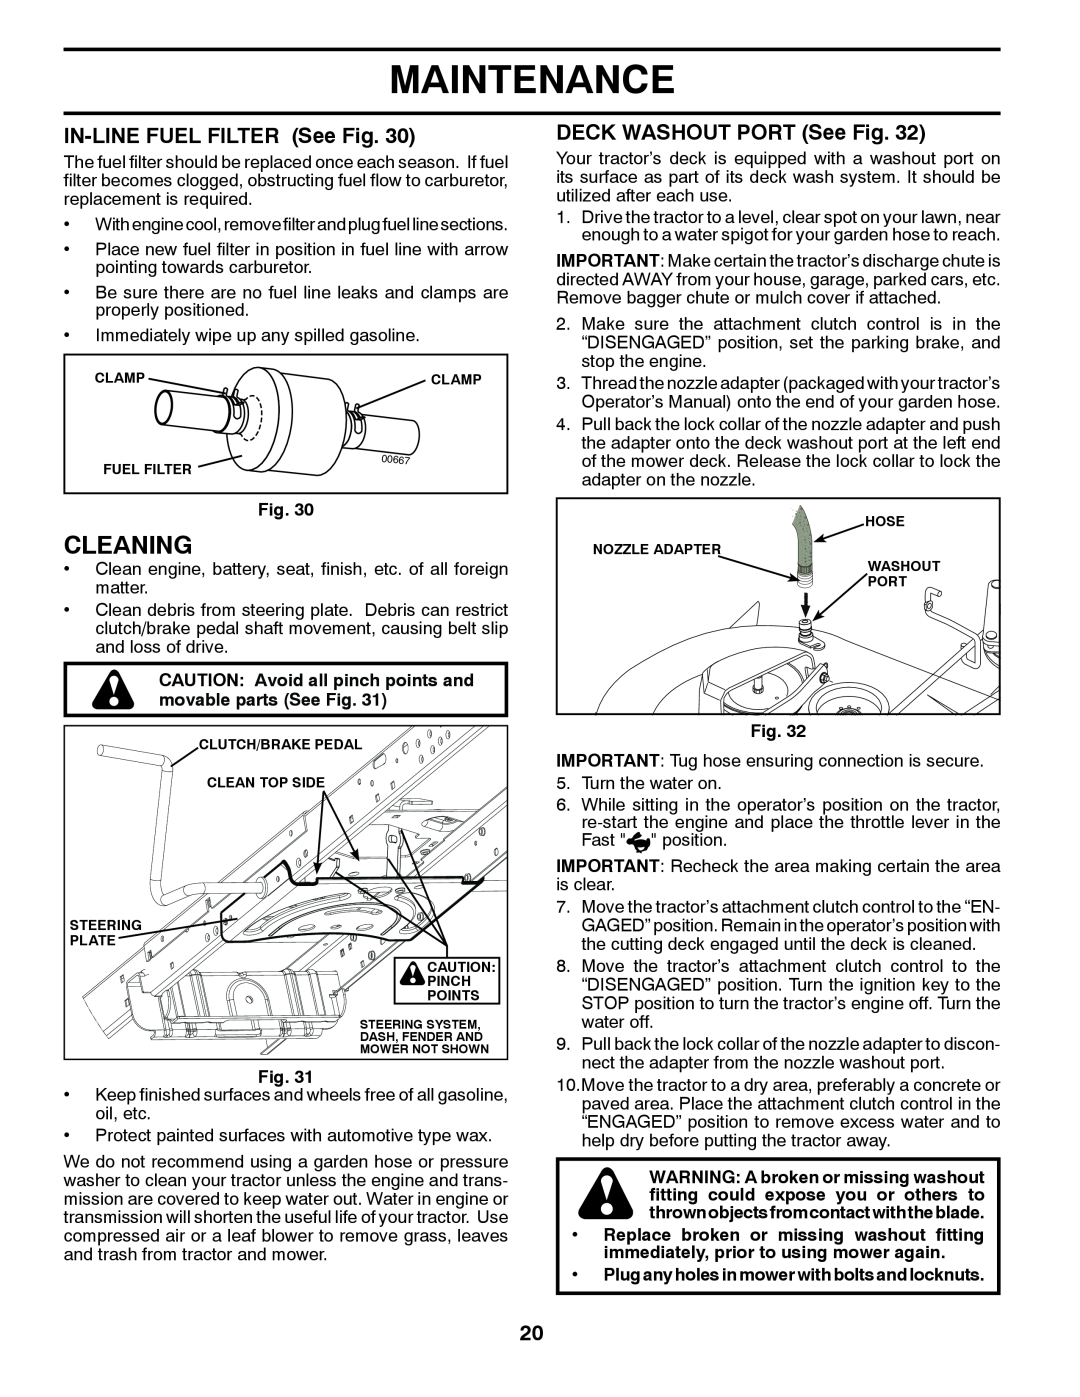 Poulan 532 43 34-32, 96042011001 manual Cleaning, IN-LINEFUEL FILTER See Fig, DECK WASHOUT PORT See Fig, Maintenance 